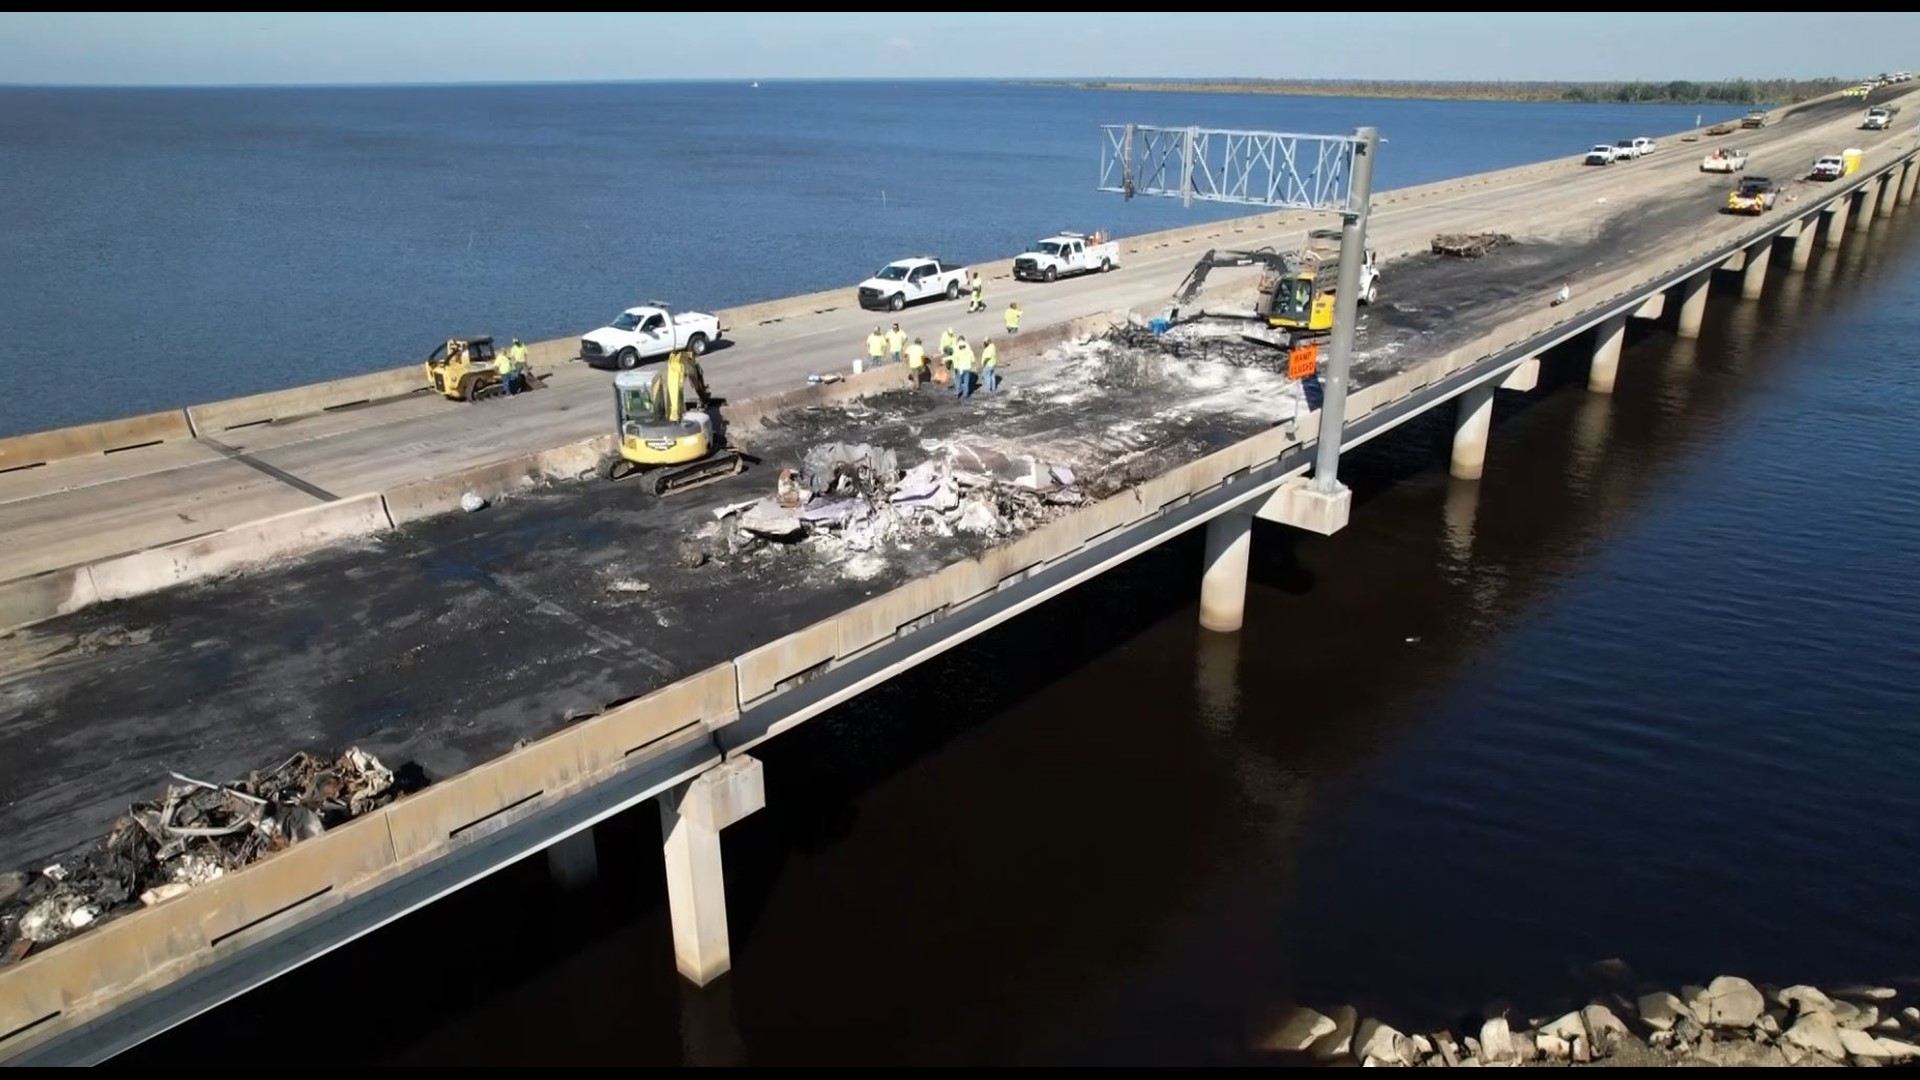 Drone video captures the cleanup effort after a fatal fiery multi-vehicle crash on I-55.